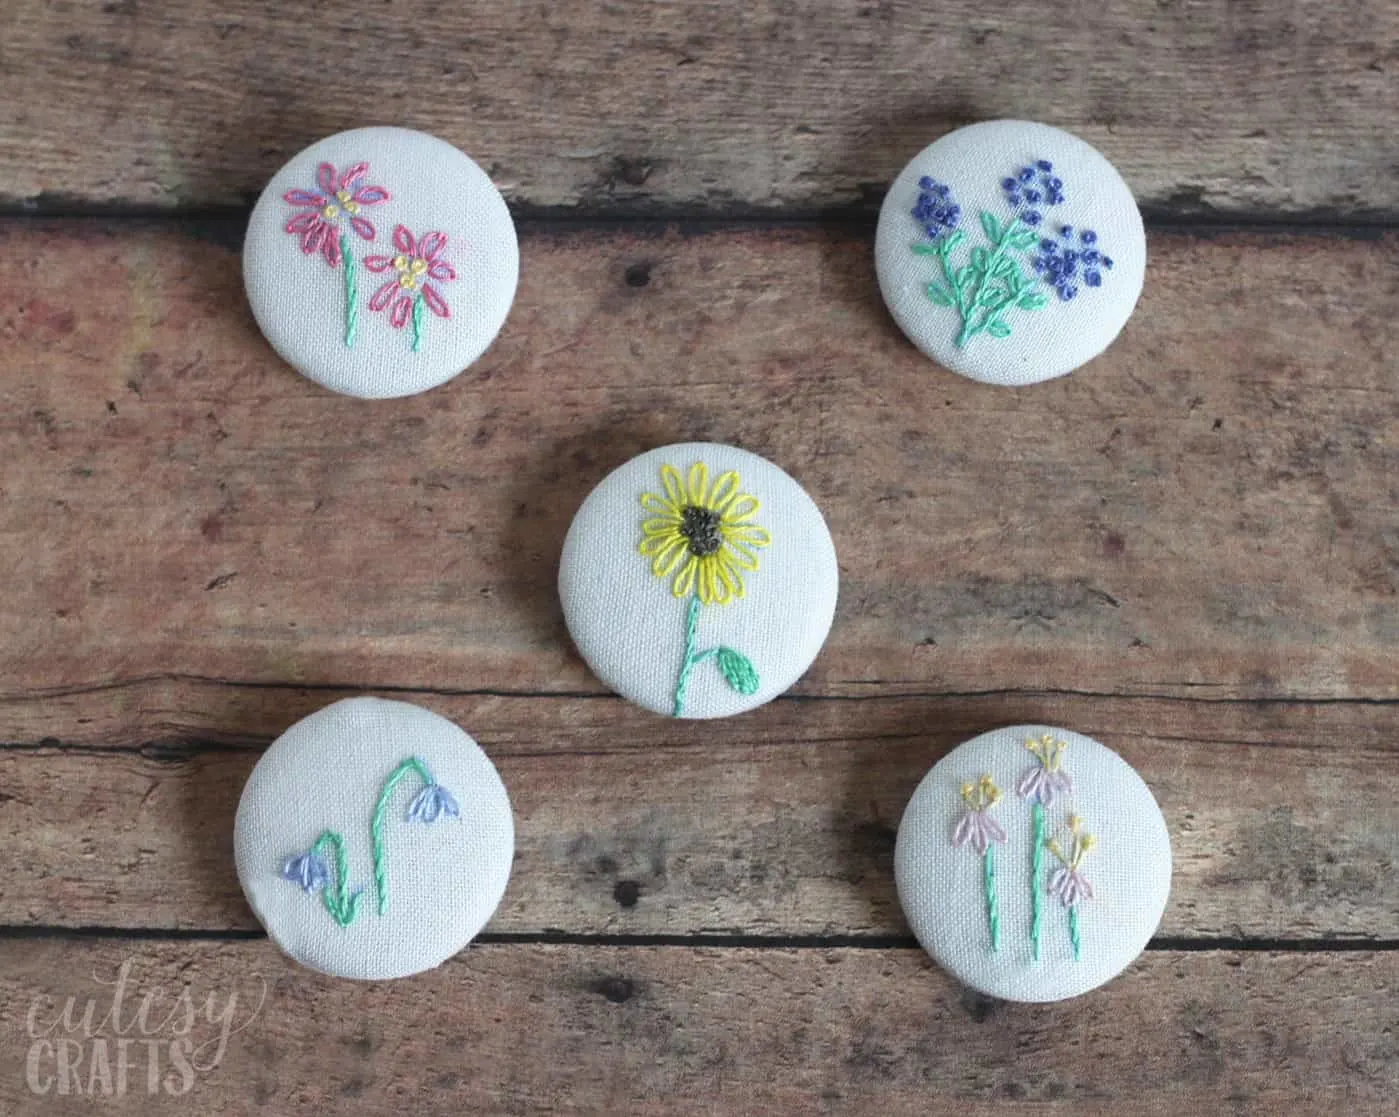 Make magnets with hand embroidery